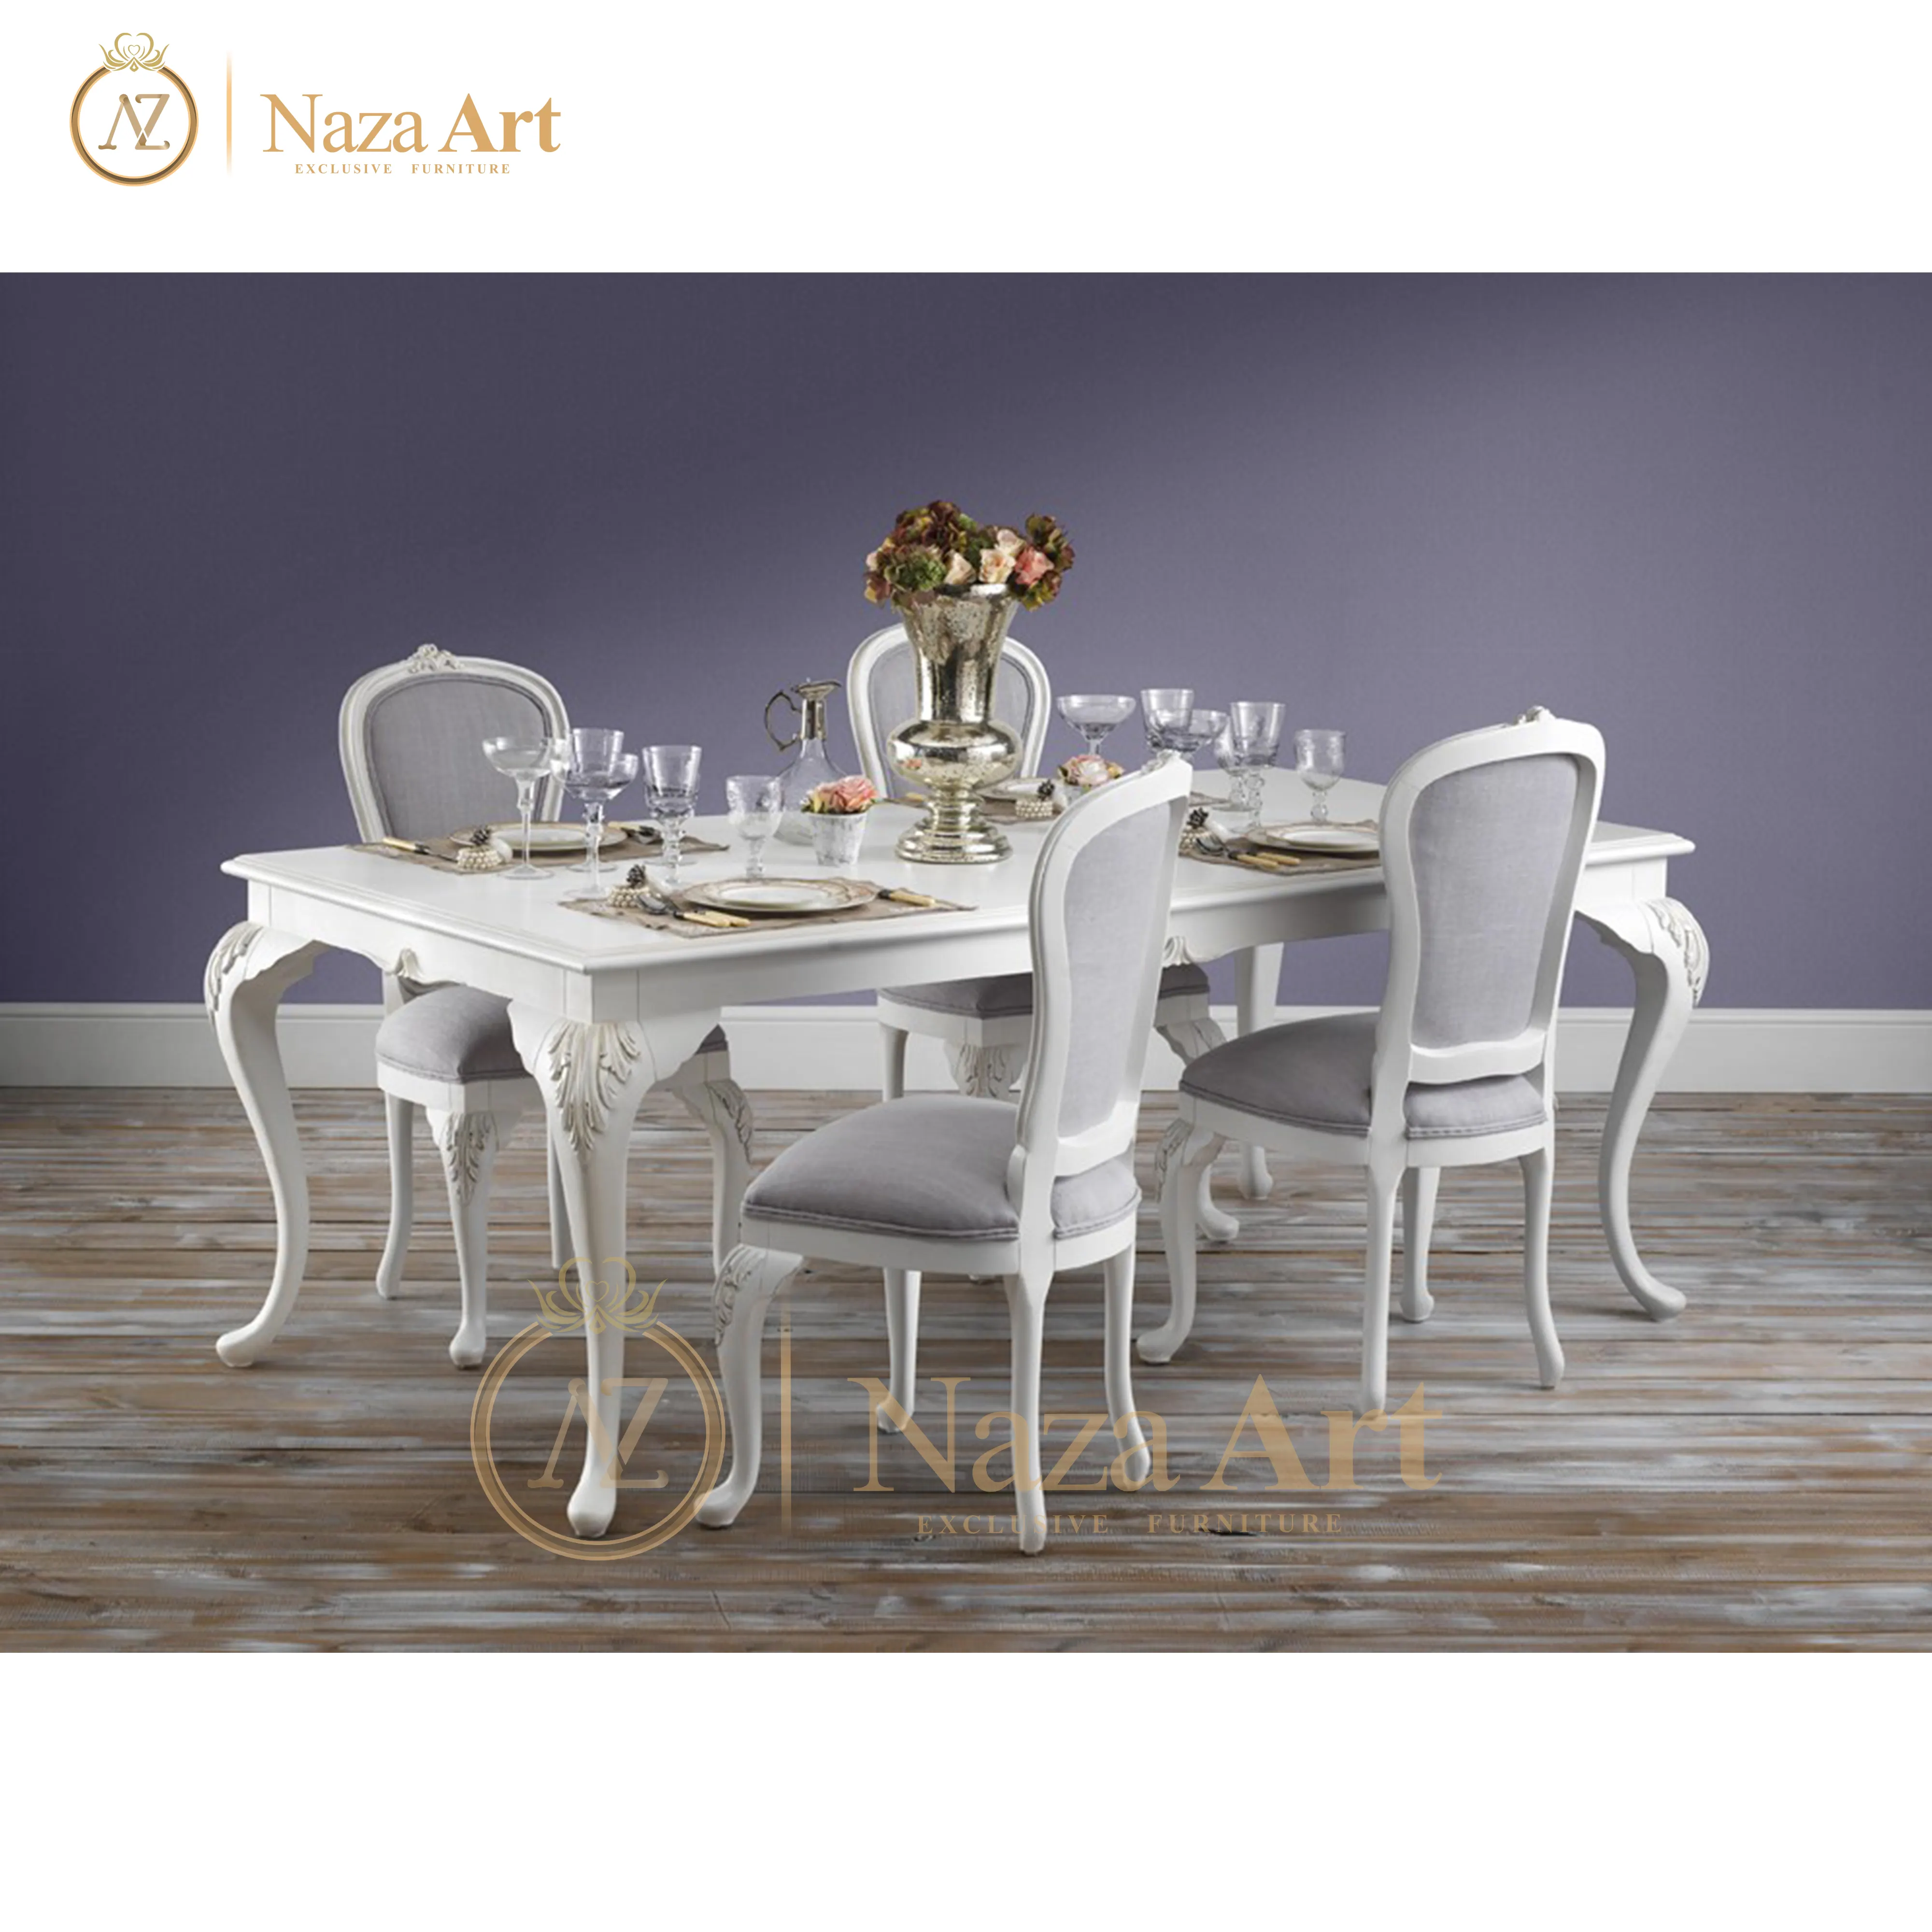 Hot Sale Luxury Dining Room Furniture Dining Table And Chairs Set For Home Furniture Best Product